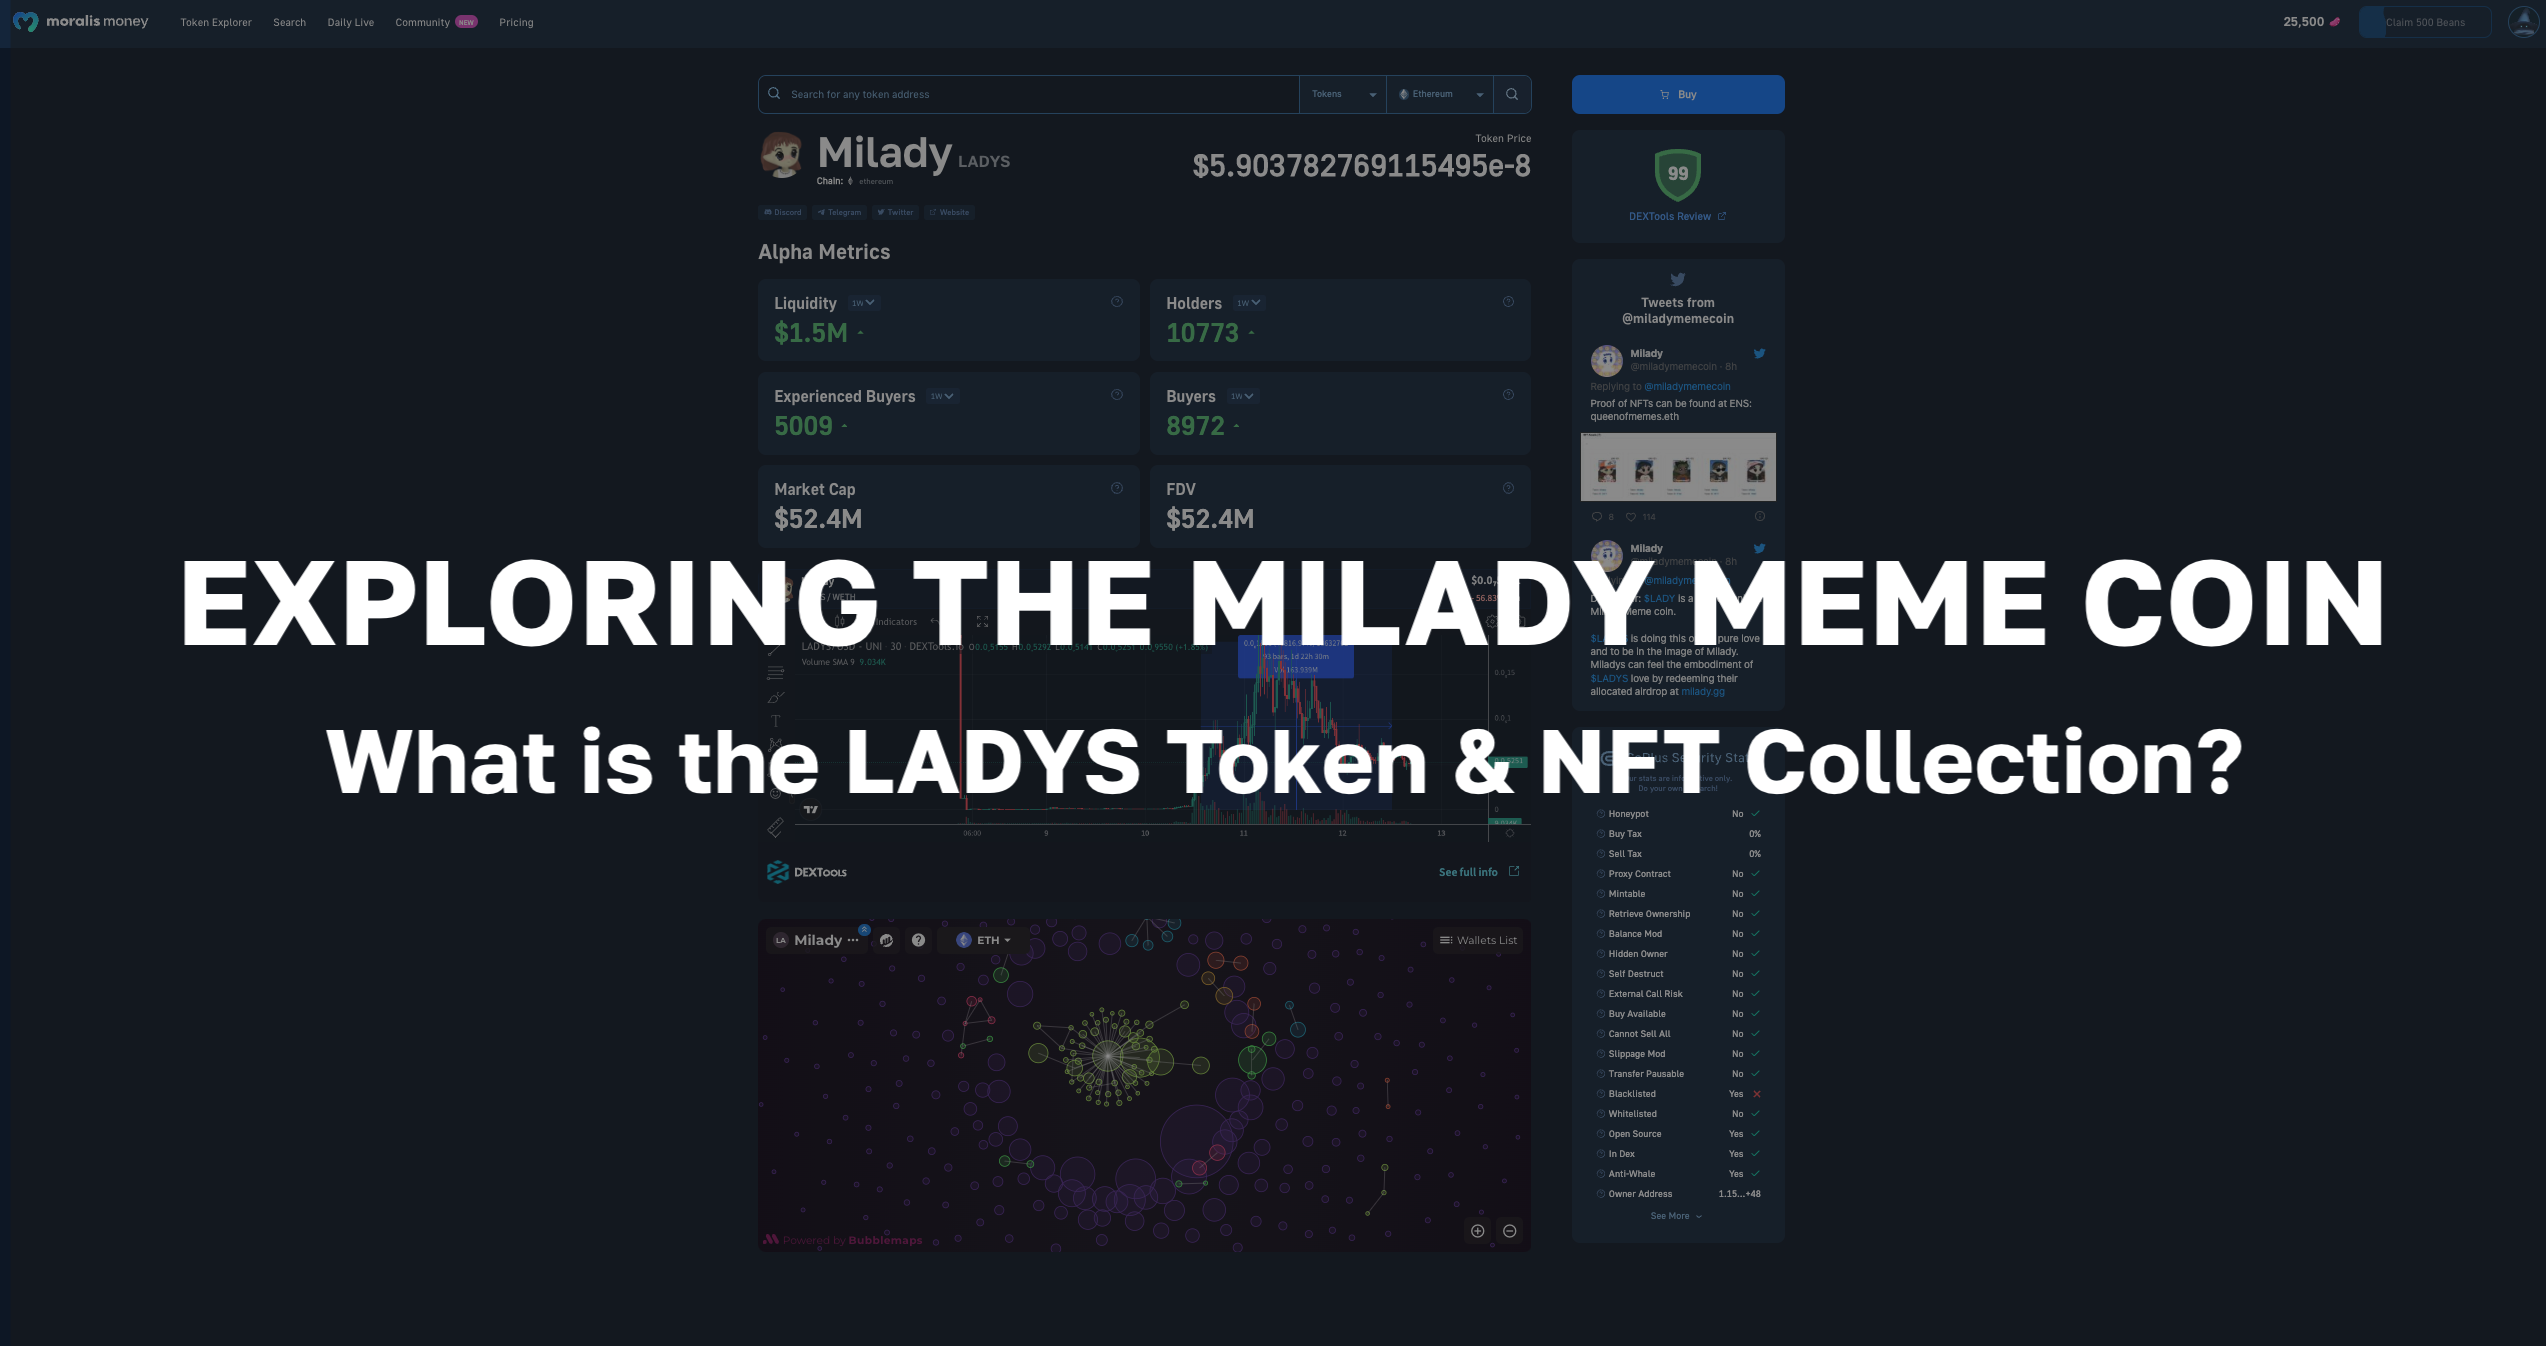 Exploring the Milady Meme Coin - What is the LADYS Token and NFT Collection?